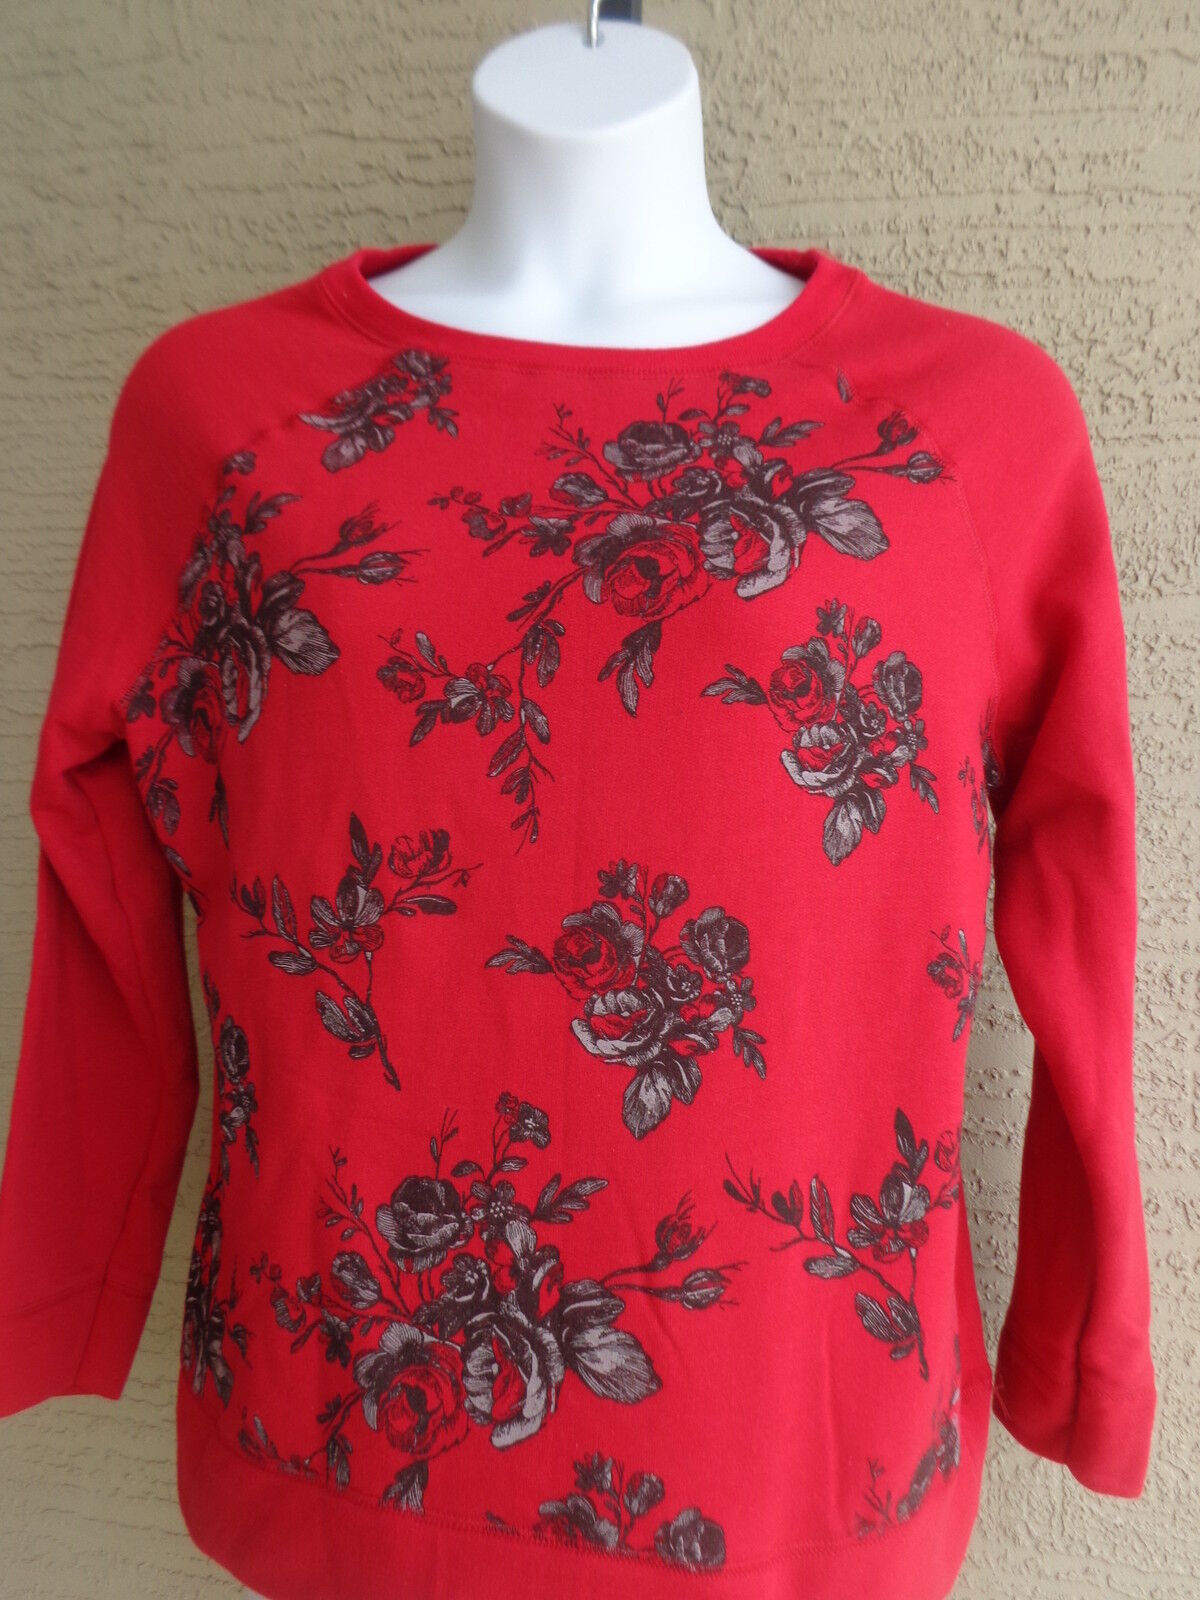 Primary image for New Just My Size  Graphic 50/50 Blend Cozy Lighter Weight Sweatshirt Red 5X